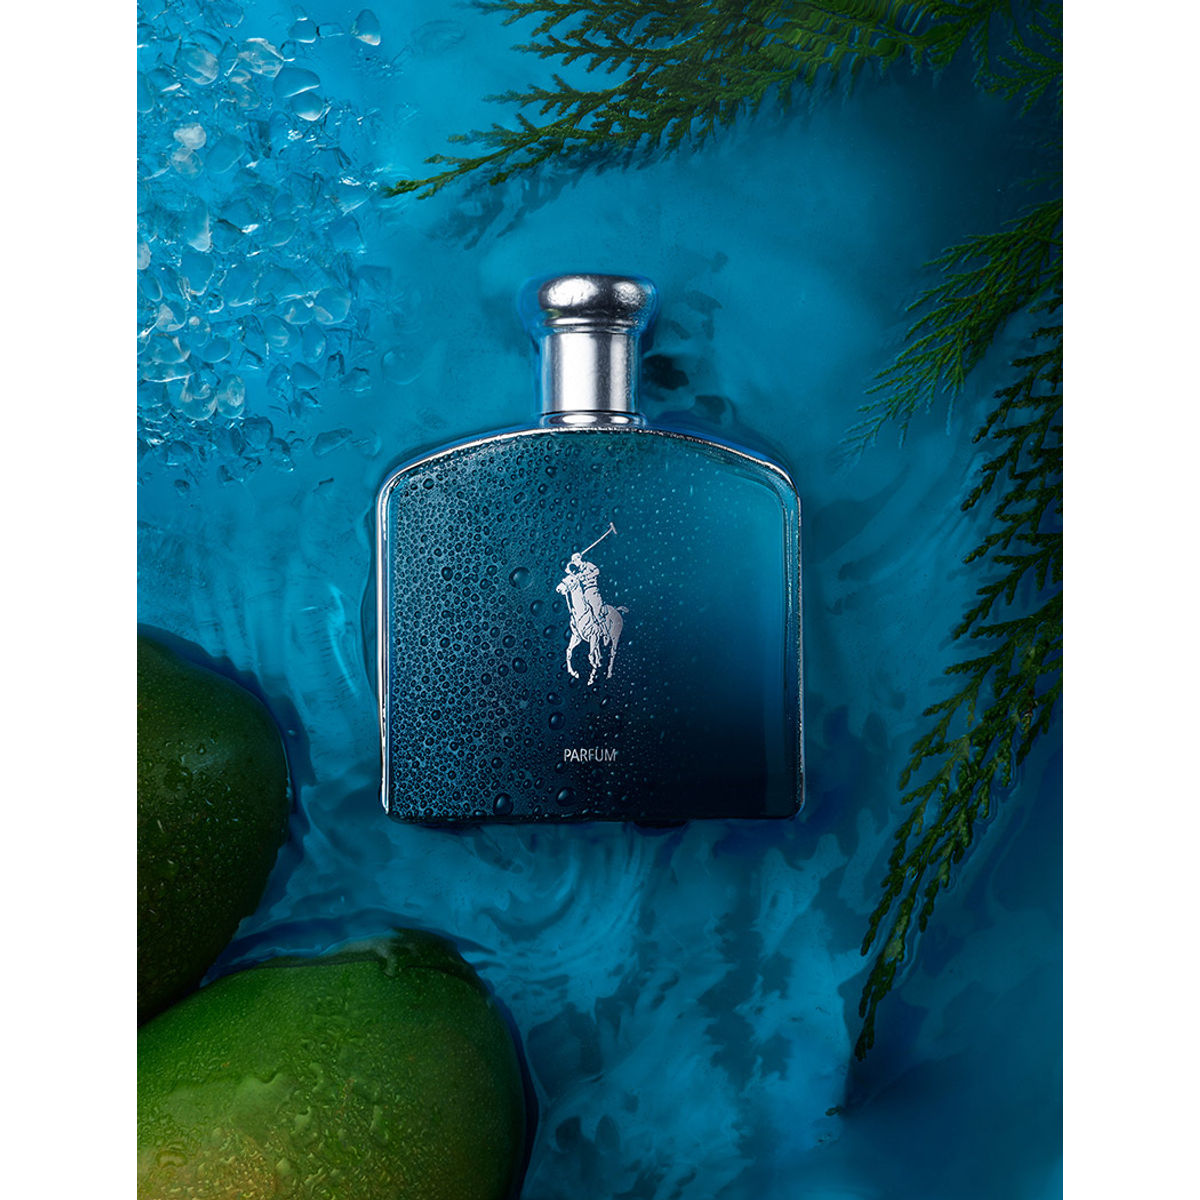 Polo Deep Blue Parfum by Ralph Lauren in this compliment test ft. @Che